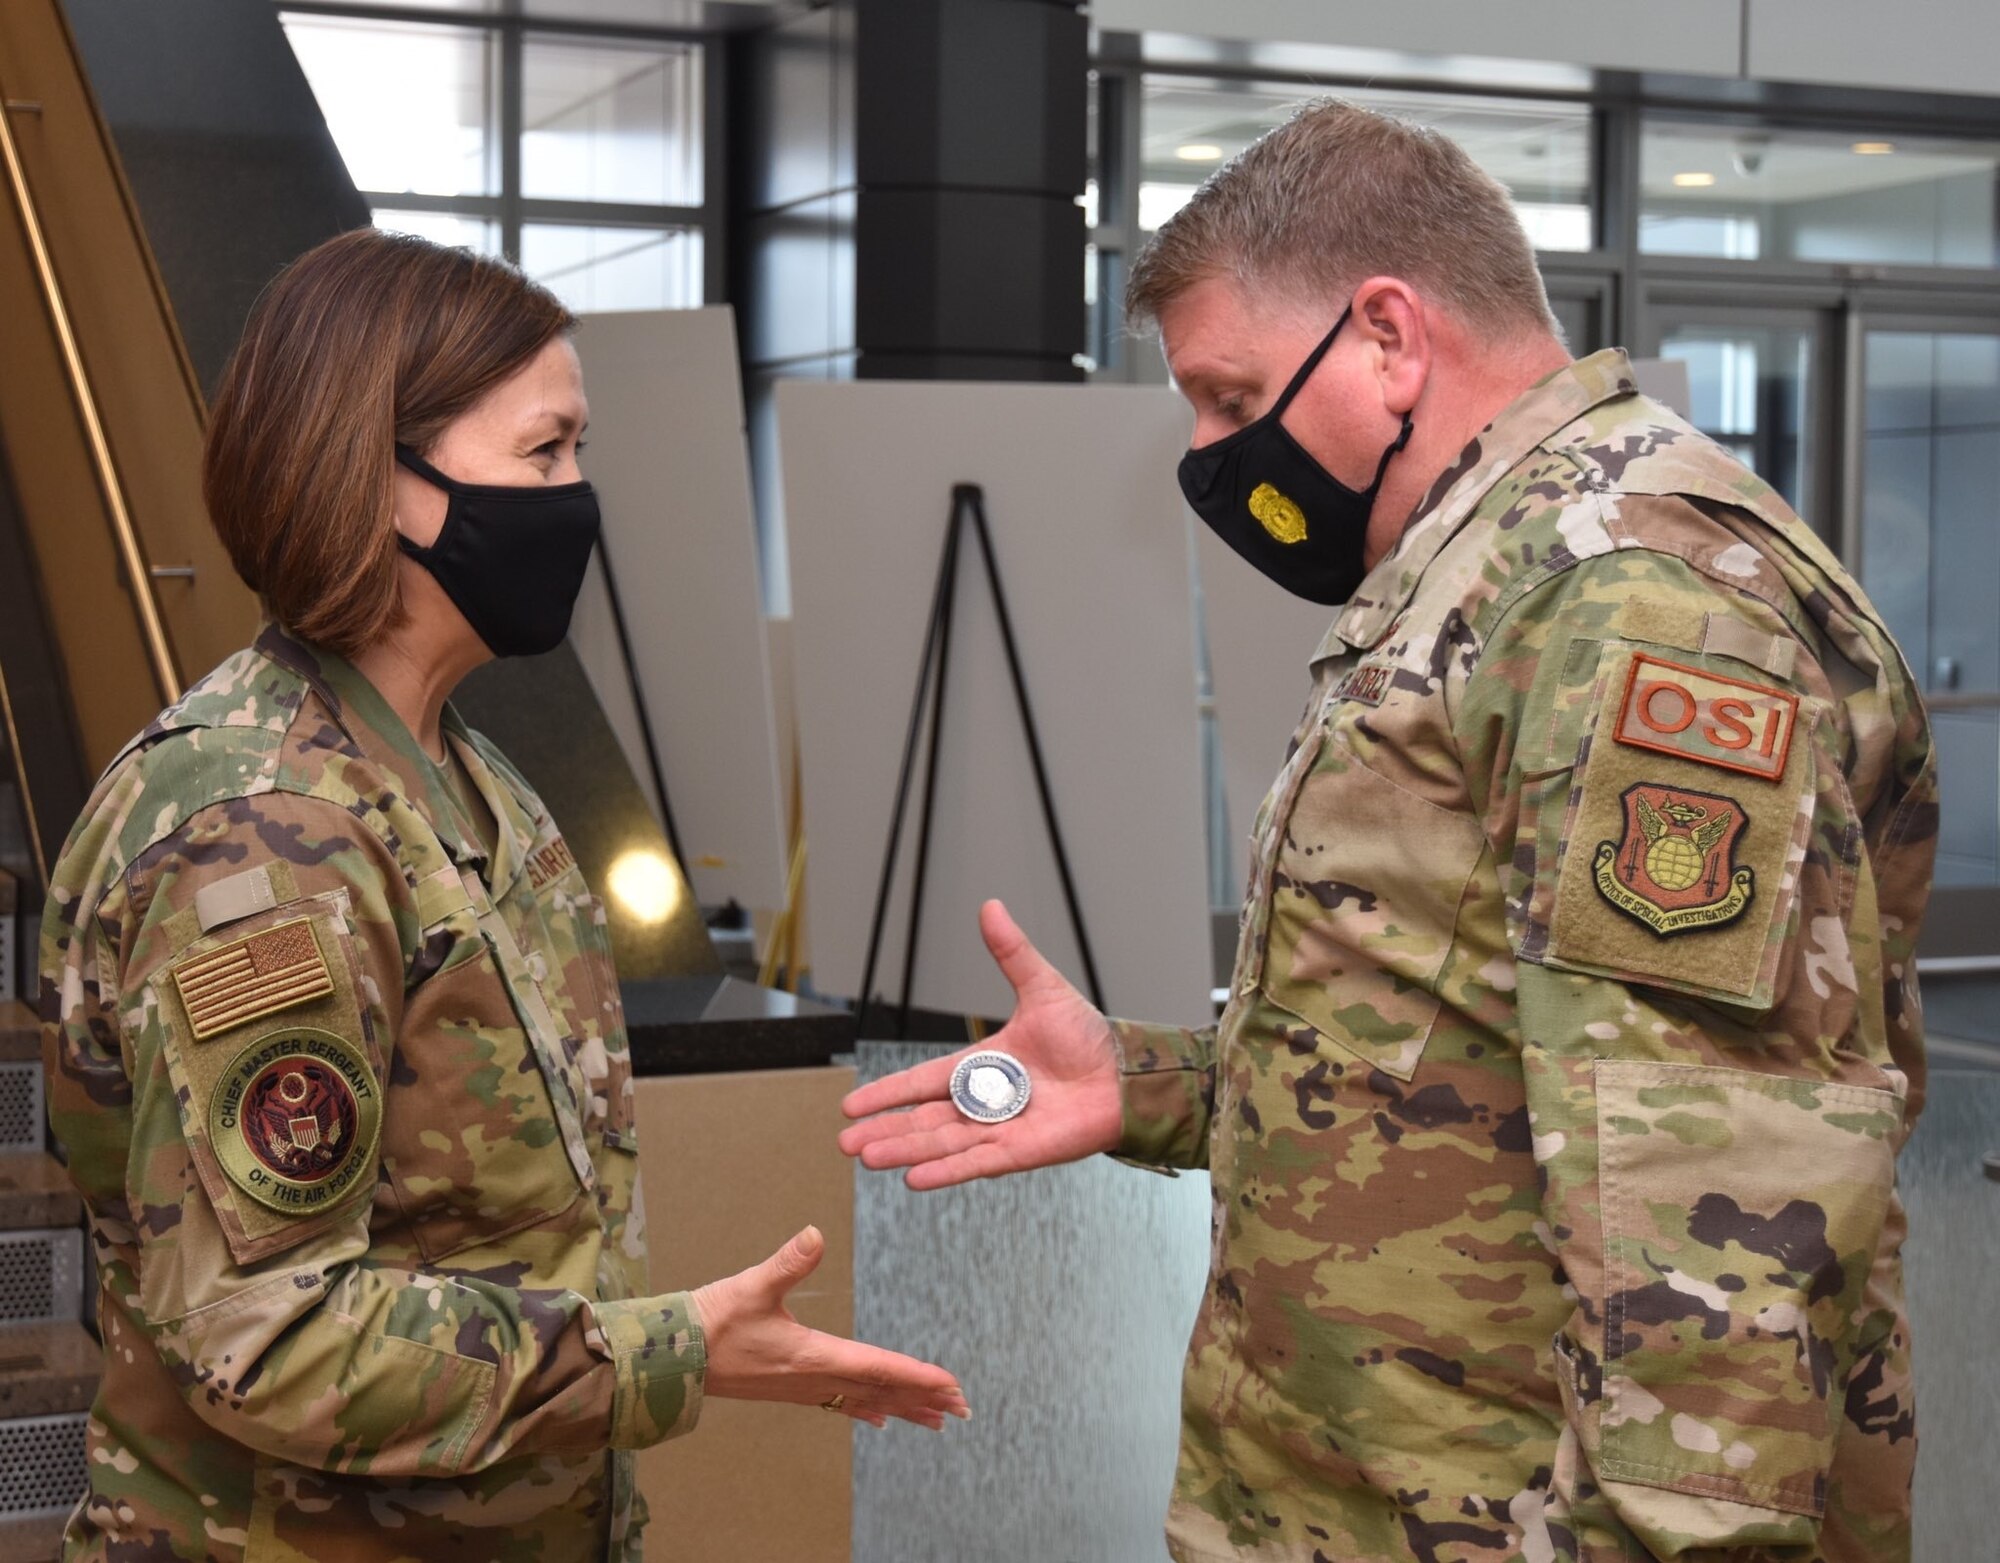 Office of Special Investigations Commander, Brig. Gen. Terry L. Bullard, presents his coin to Chief Master Sergeant of the Air Force JoAnne S. Bass, during her inaugural visit to OSI Headquarters March 12 as 19th CMSAF, and the first woman in history to serve as the highest-ranking noncommissioned officer of a U. S. military service branch. (Photo by SA Spencer King)